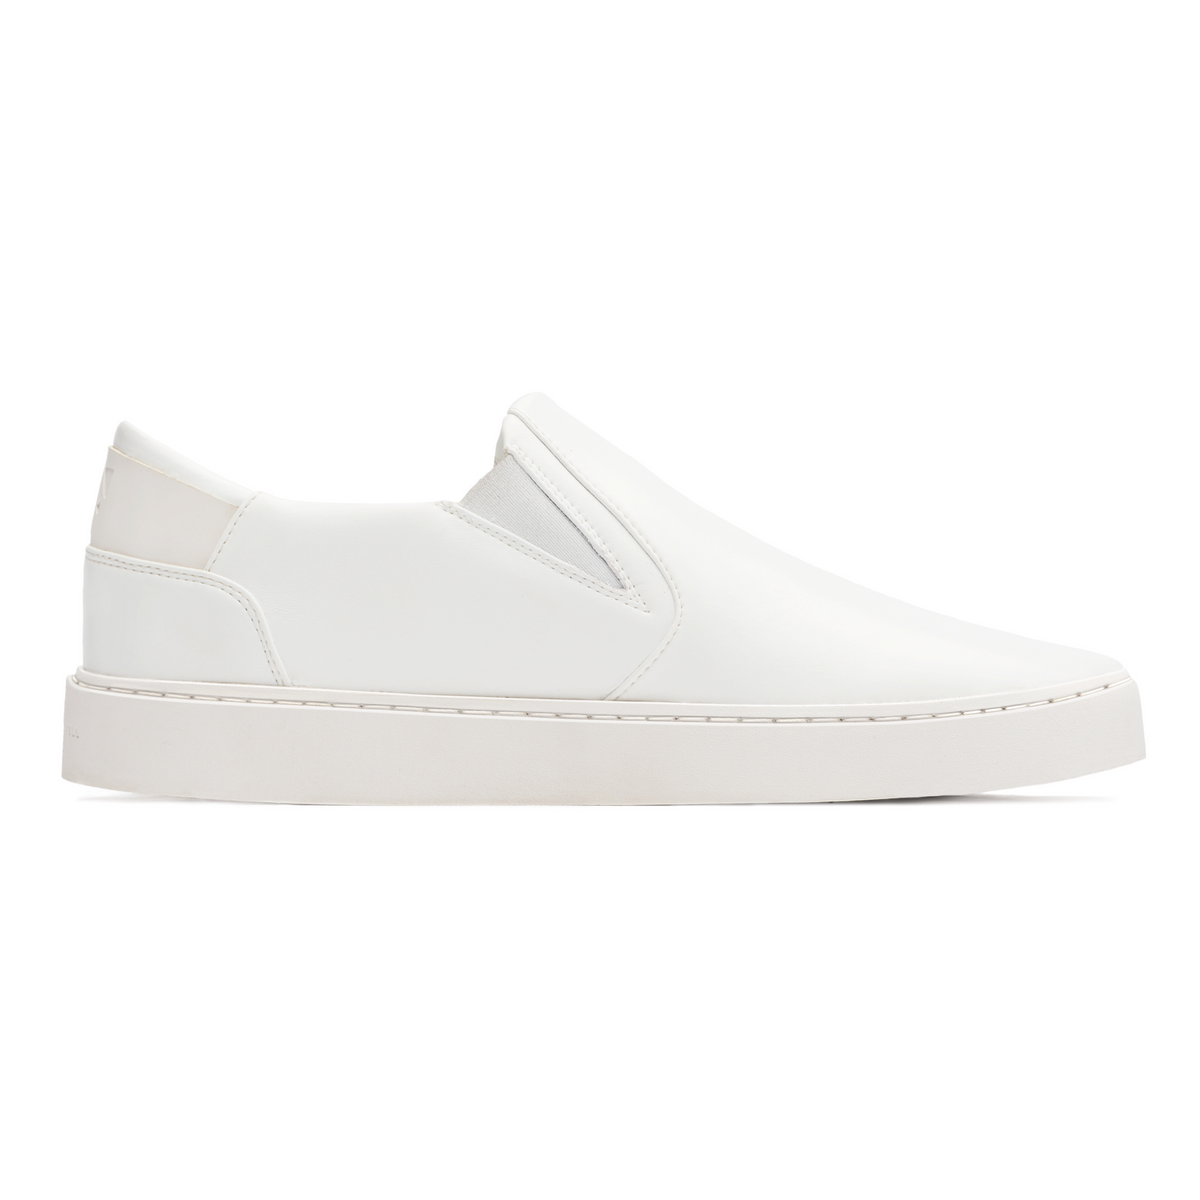 classic white slip on sneakers